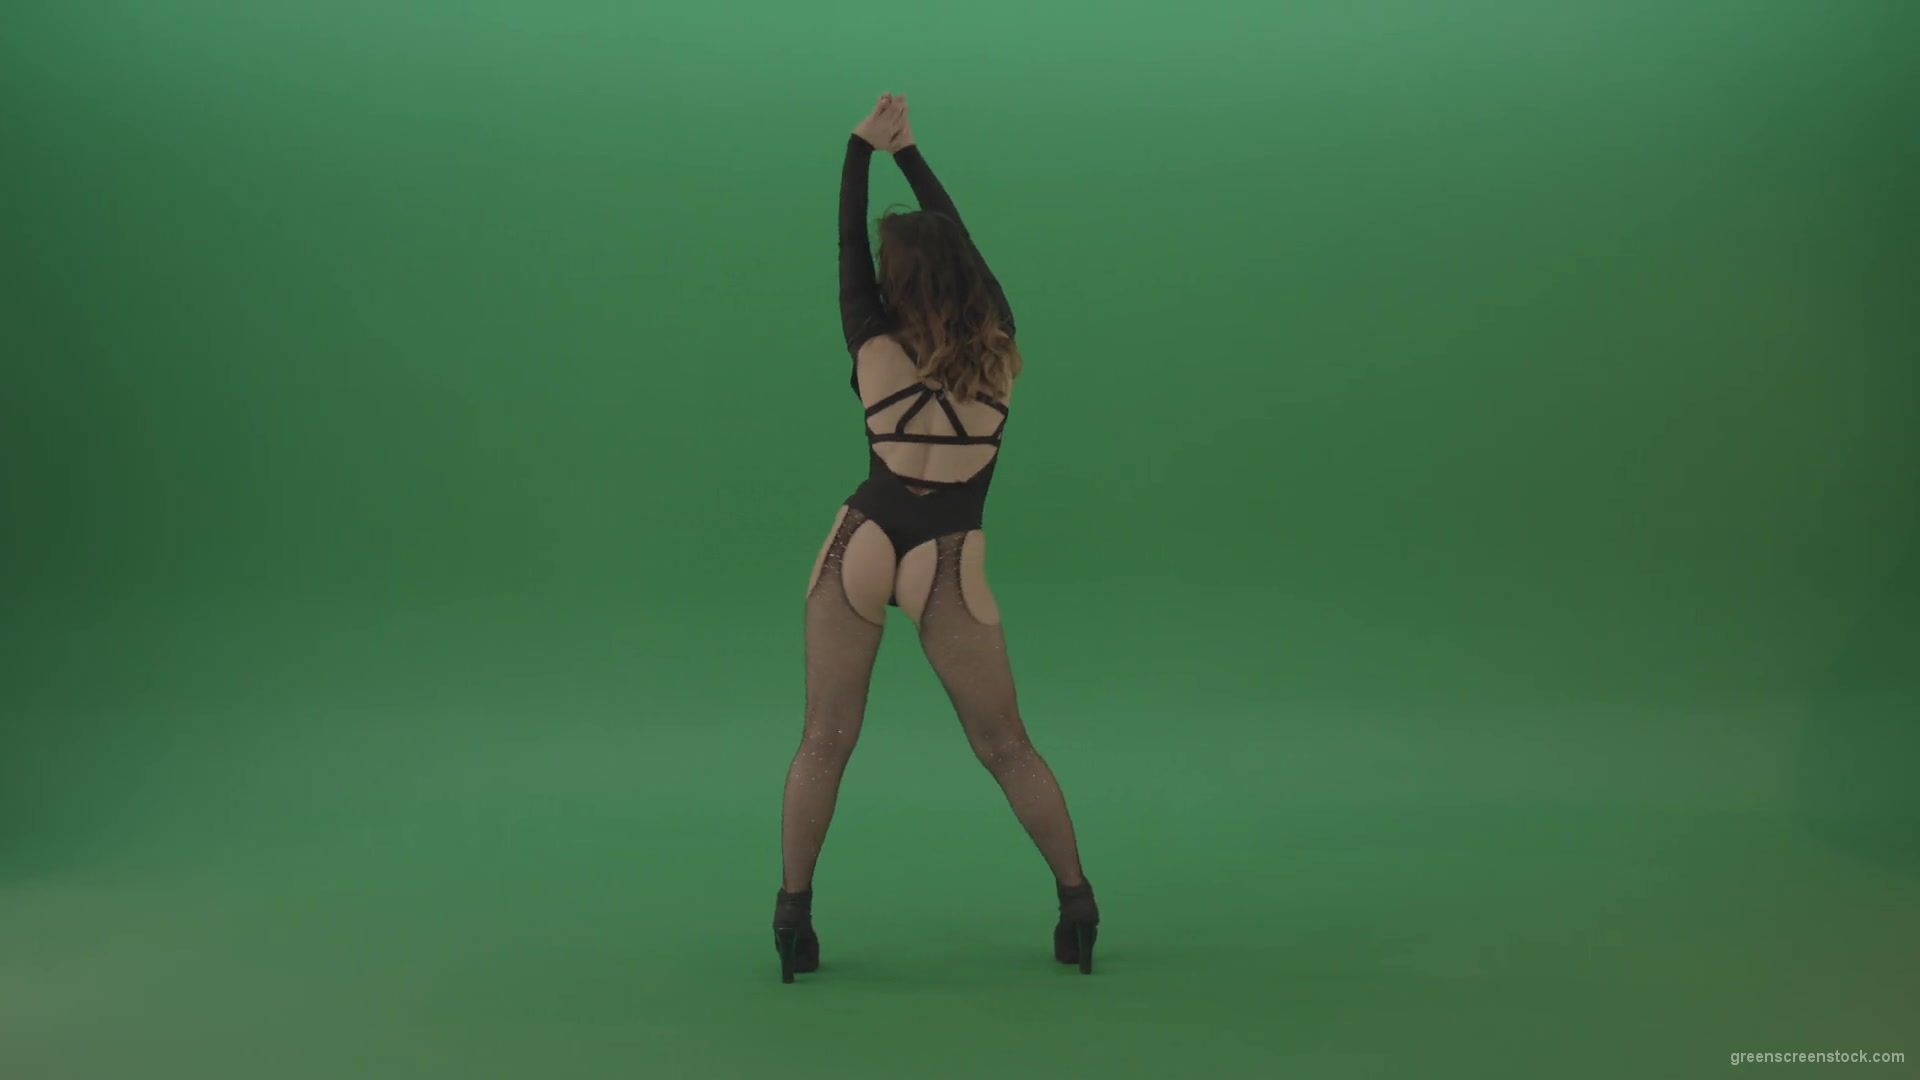 Go-Go-Girl-Dancing-and-shaking-the-ass-in-back-side-view-on-green-screen-1920_007 Green Screen Stock